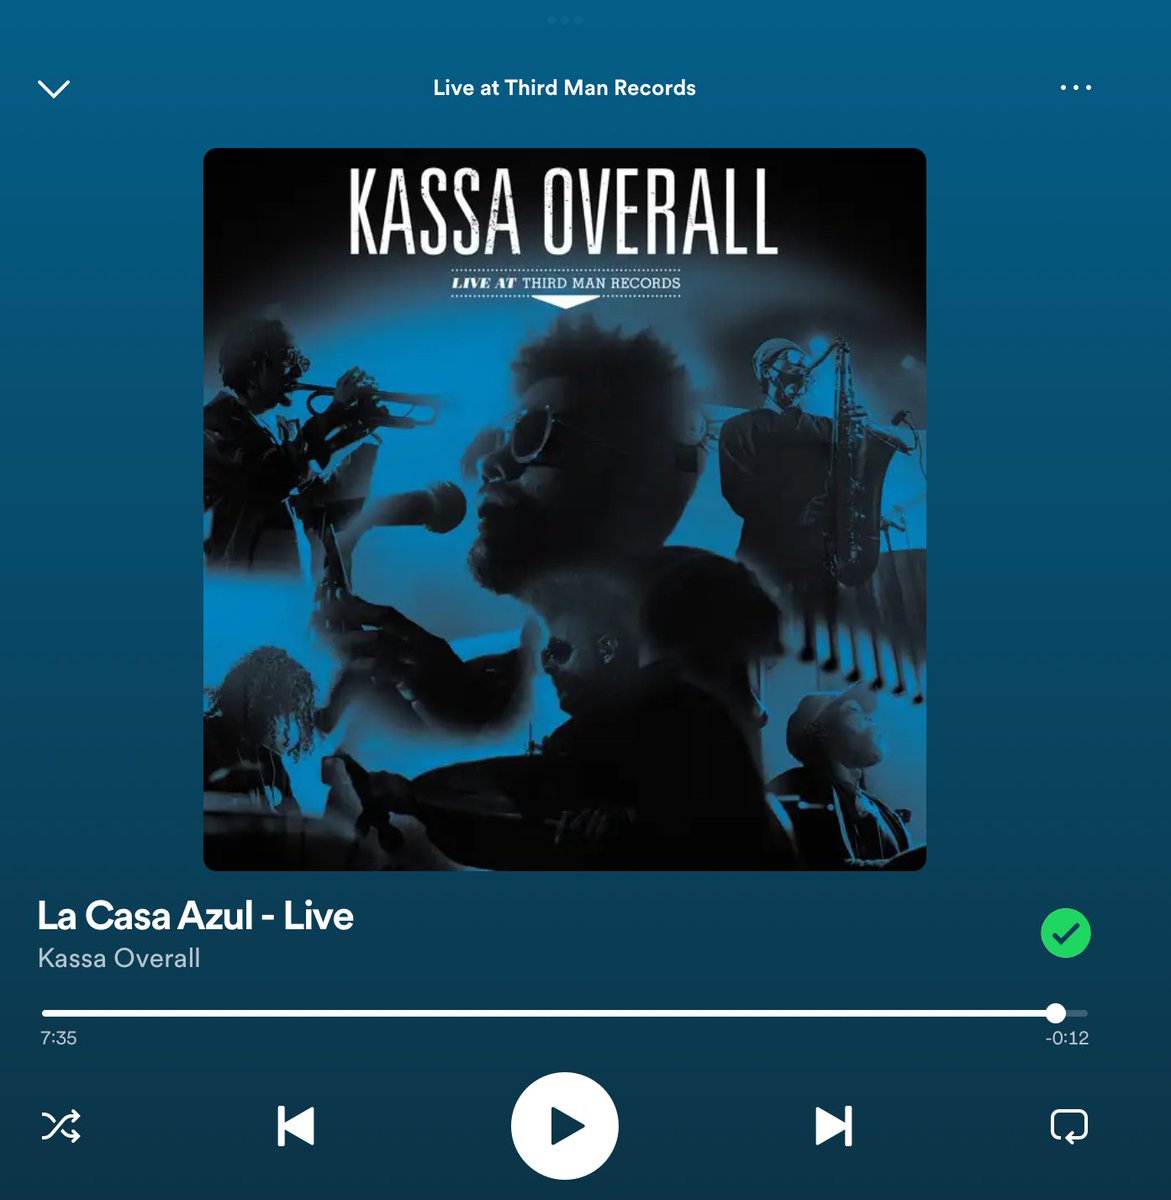 Everybody should get to see @KassaOverall perform live, but if you haven’t yet, listen to this live recording that captures the thrill of it all. You can feel the energy of @TomokiSanders running around the crowd with a cowbell. And @TheoCroker is on here!